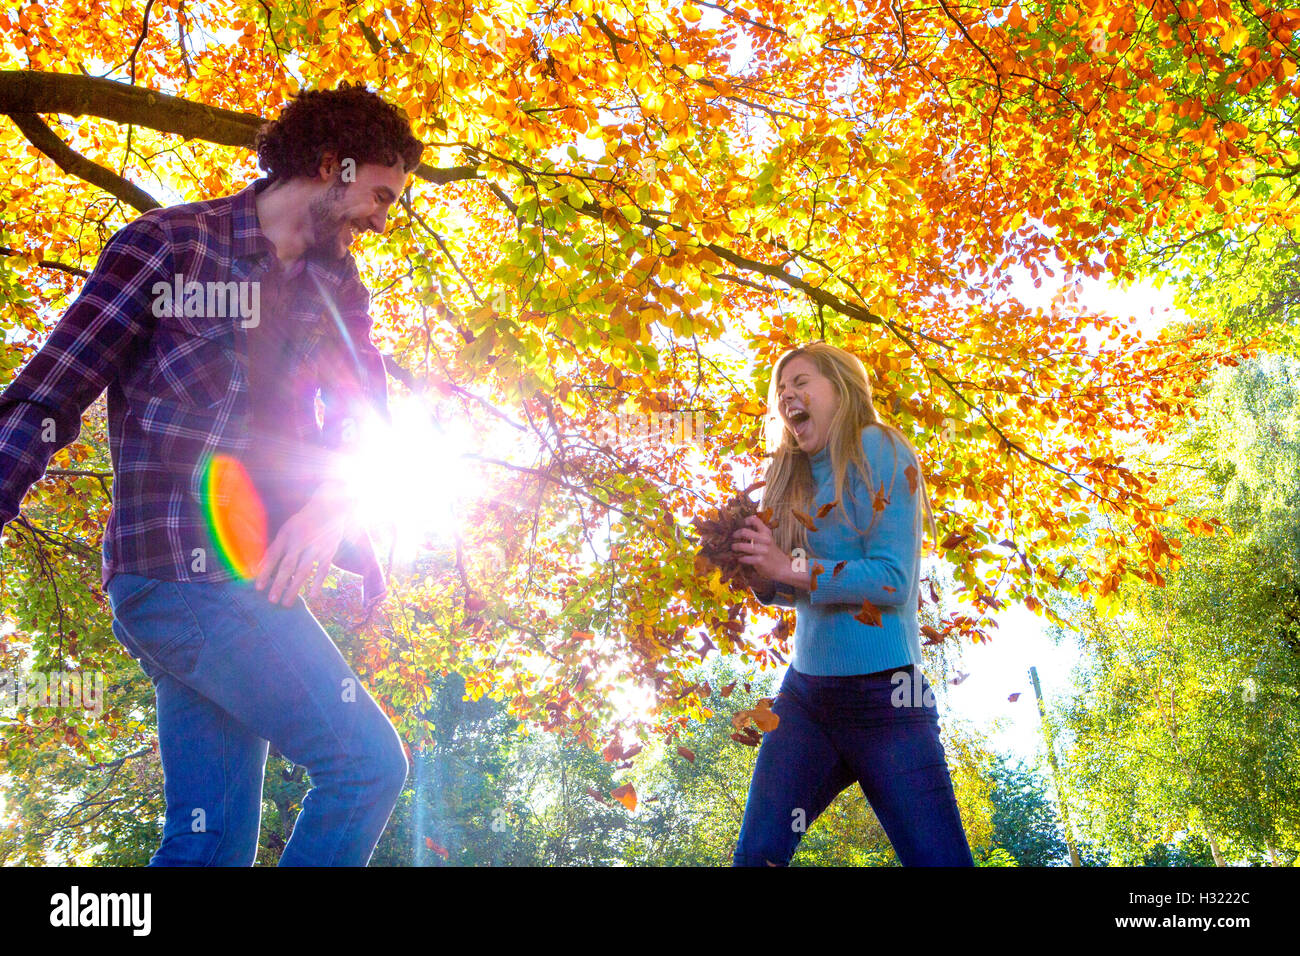 Young couple having fun in Autumn. They are throwing leaves at each other under the trees. Stock Photo